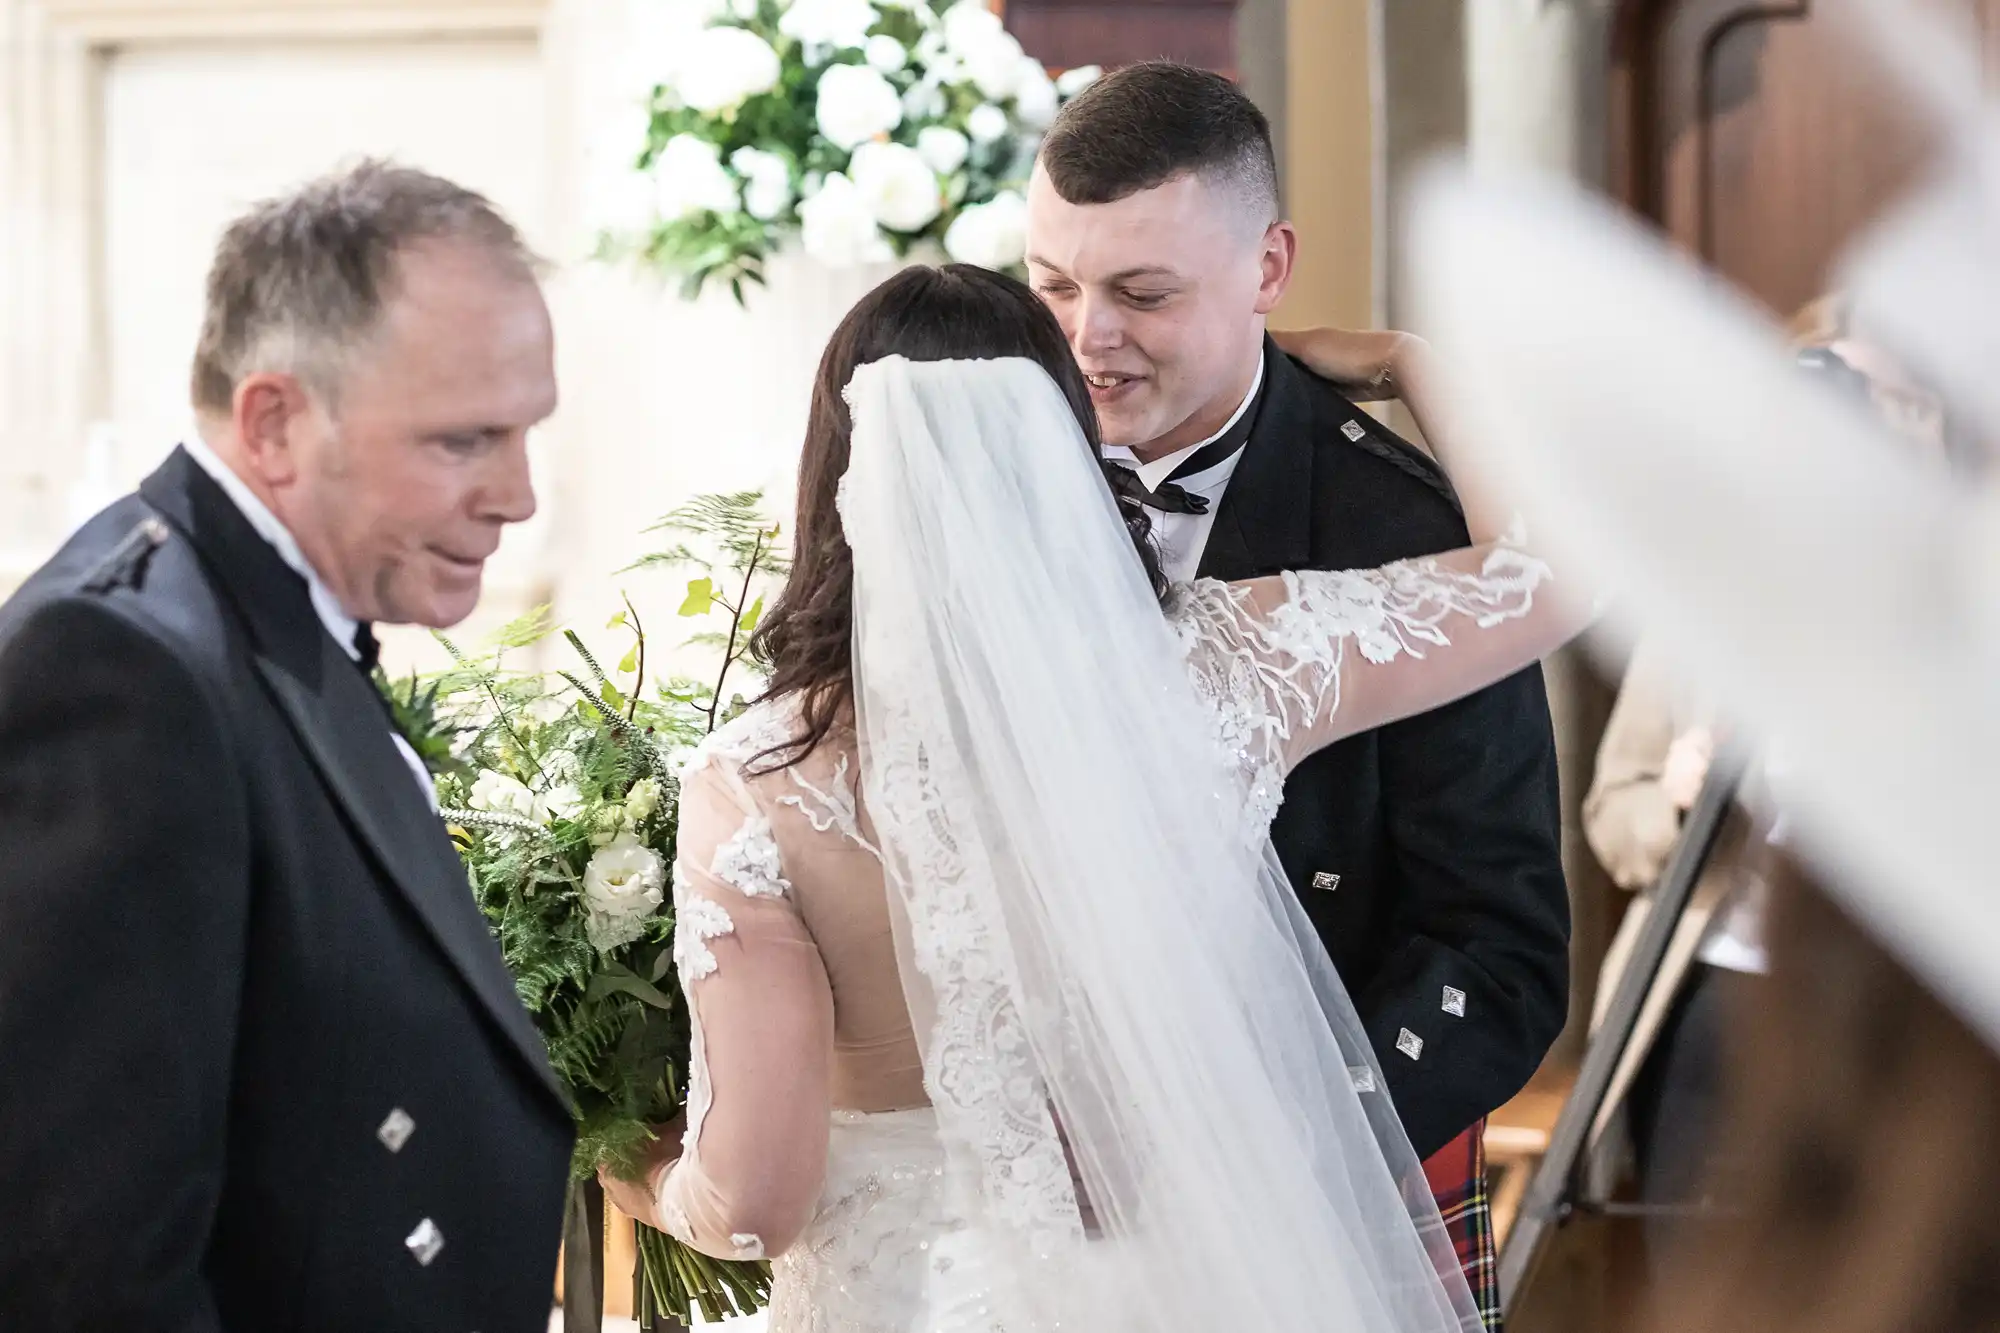 A bride and groom embrace, smiling, as an older man looks on during a wedding ceremony in a church.